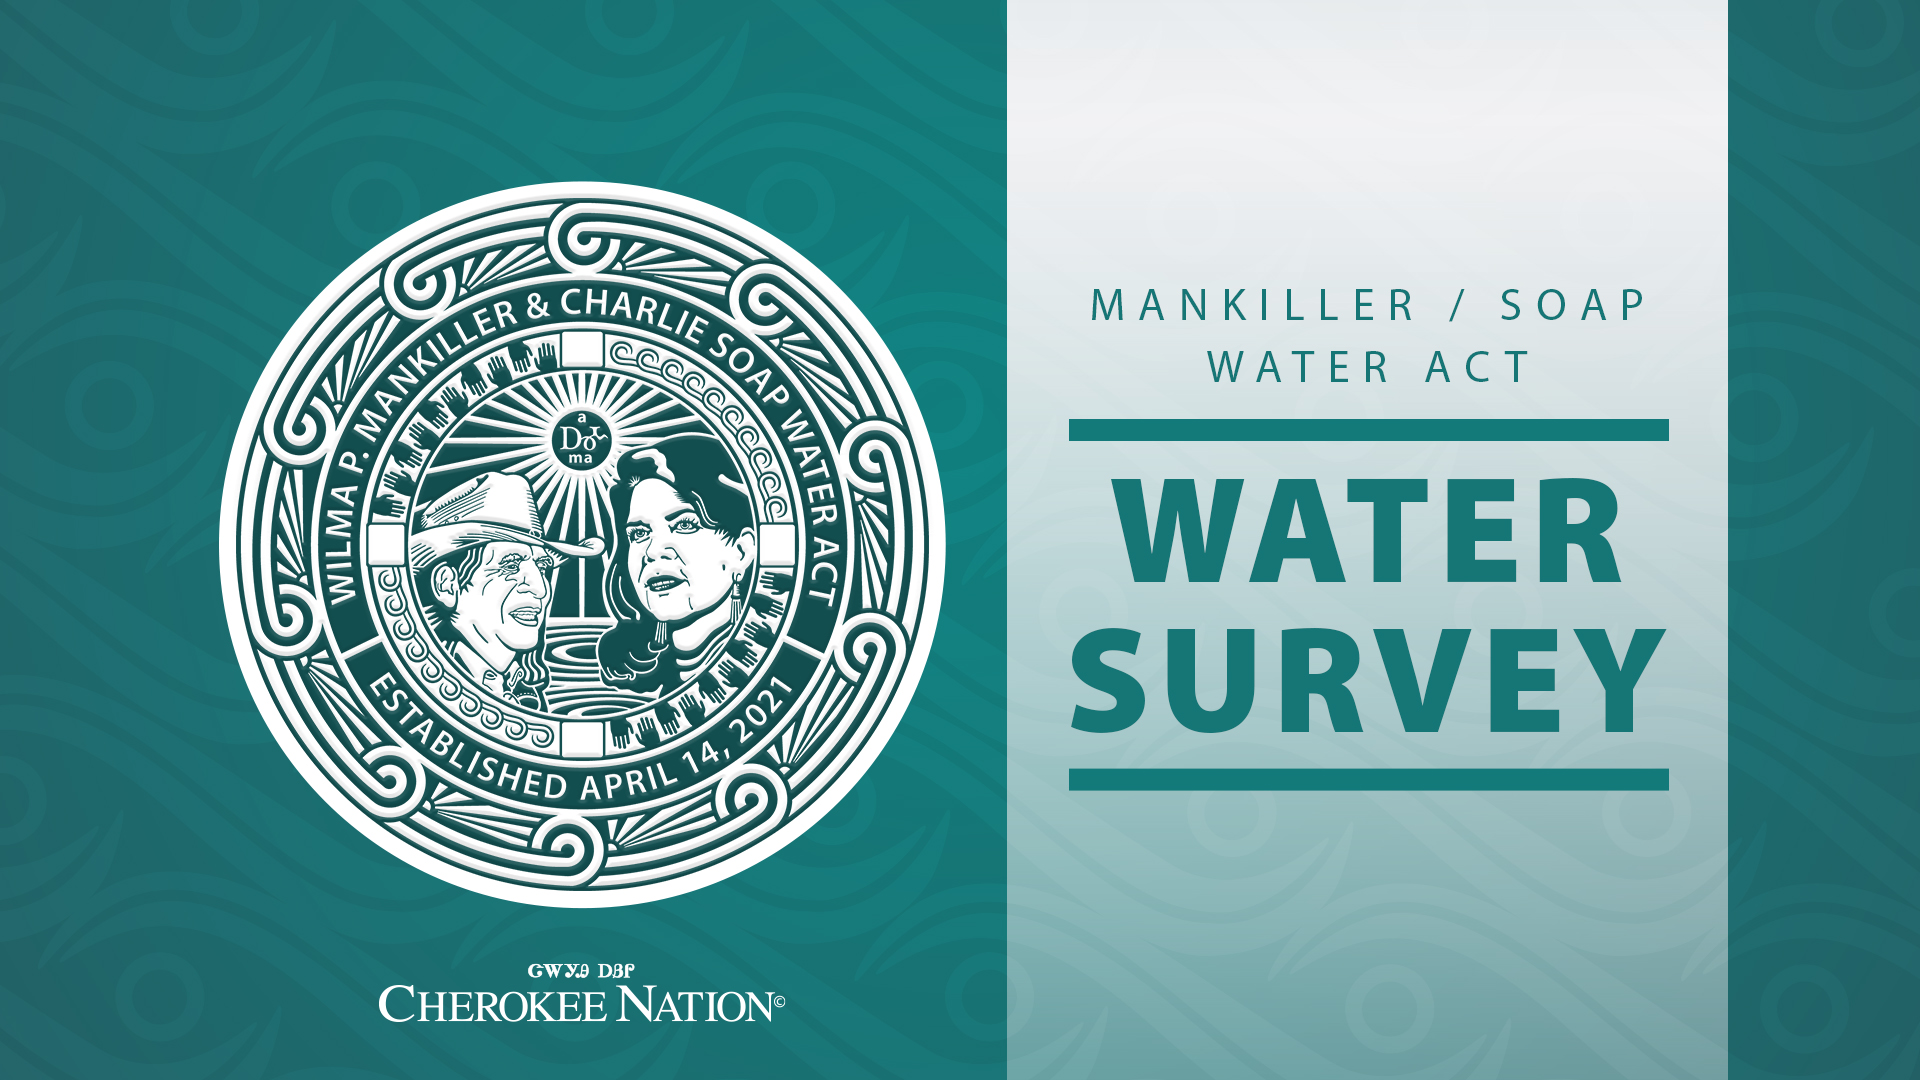 Wilma P. Mankiller and Charlie Soap Water Act